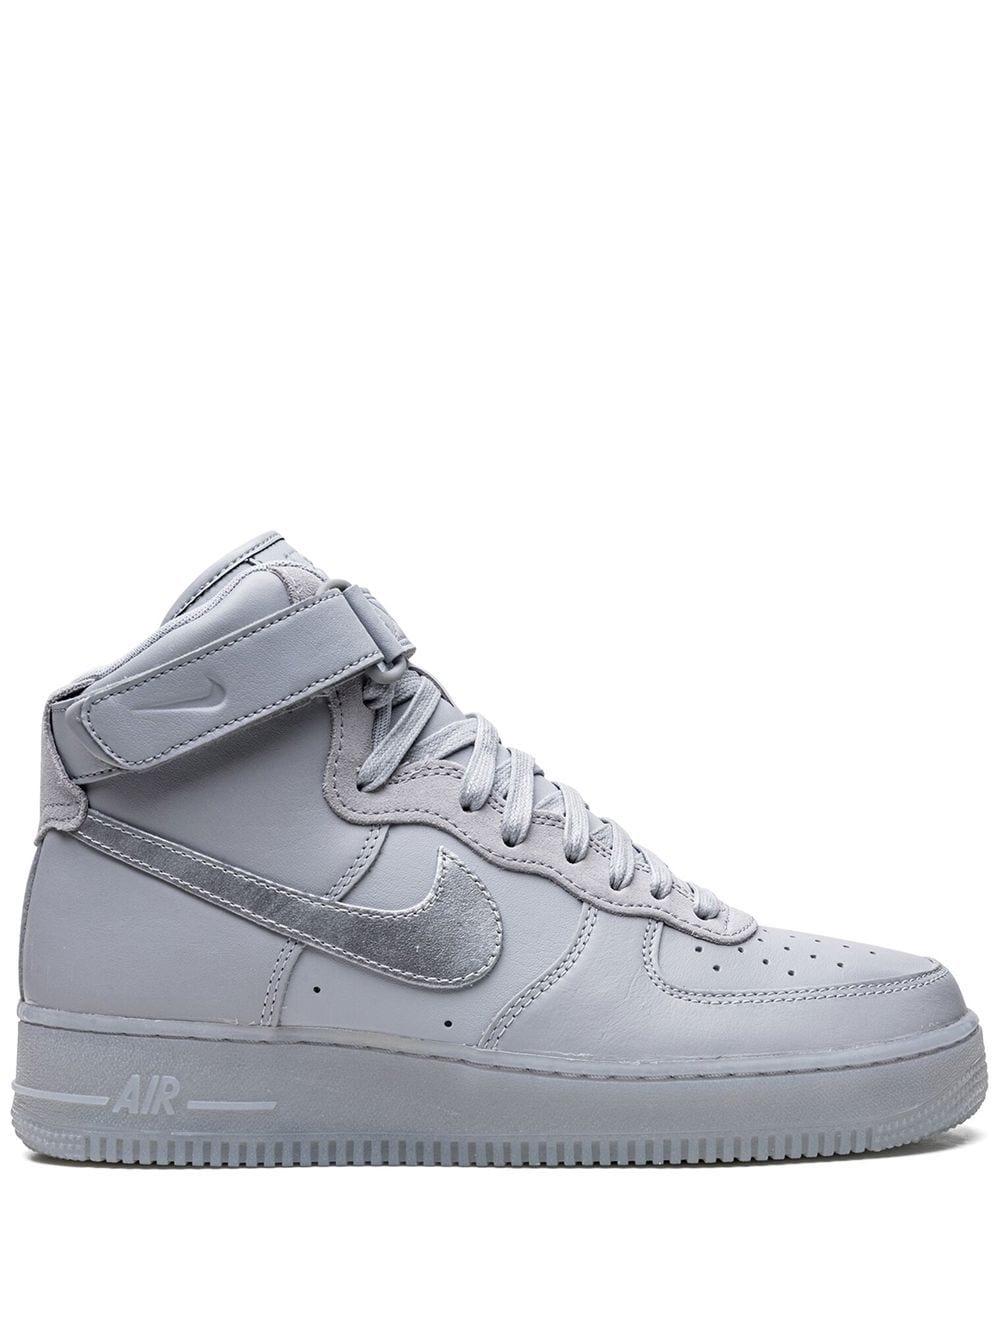 Nike Air Force 1 High "grey Volt" Sneakers in Grey for Men | Lyst Canada